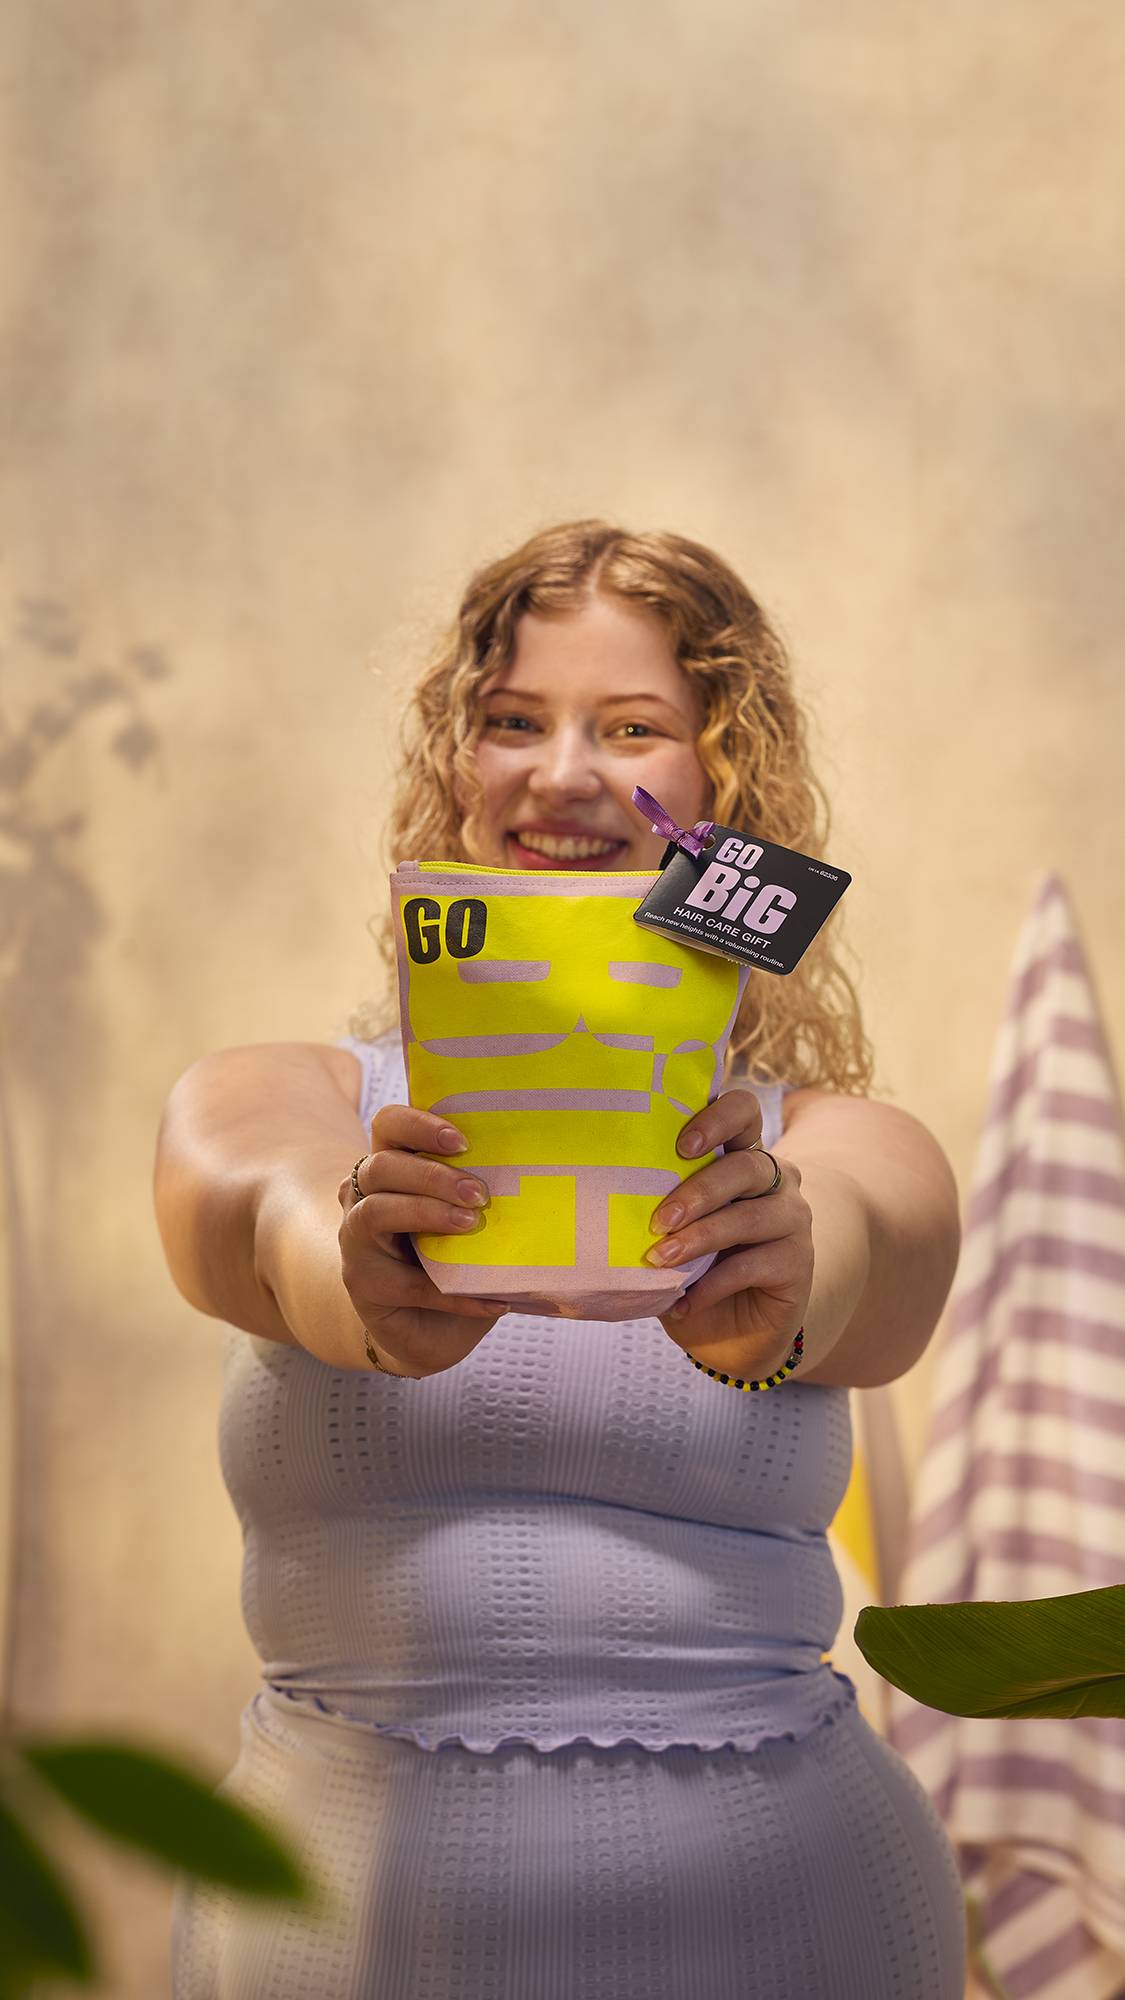 The image shows the model in a lavender-purple loungewear set, with curly blonde hair on a warm, earth-toned background holding the Go Big haircare gift bag up to the camera.